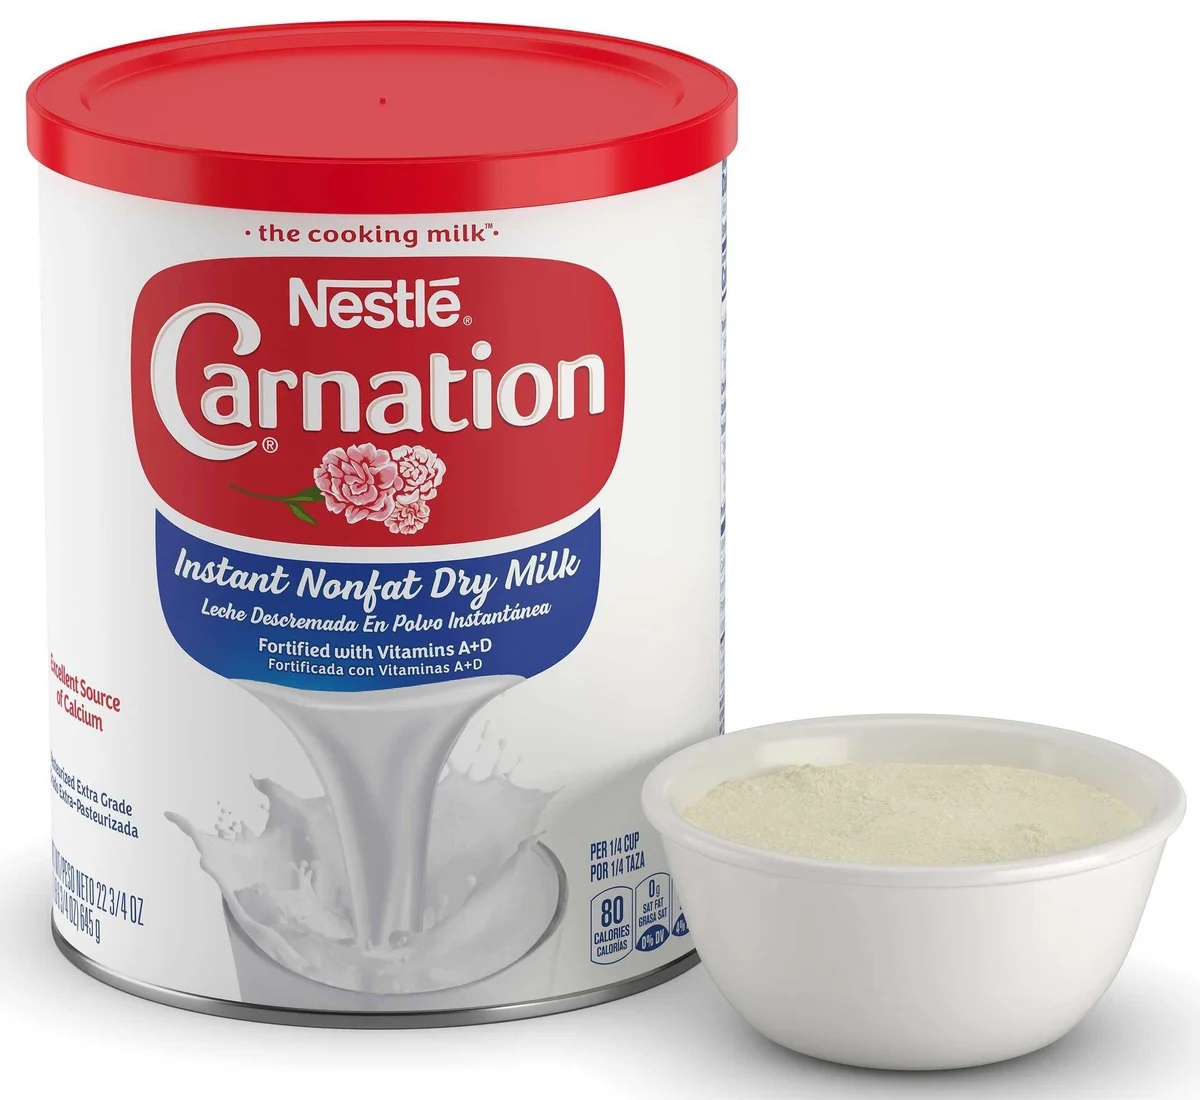 11-carnation-dry-milk-nutrition-facts